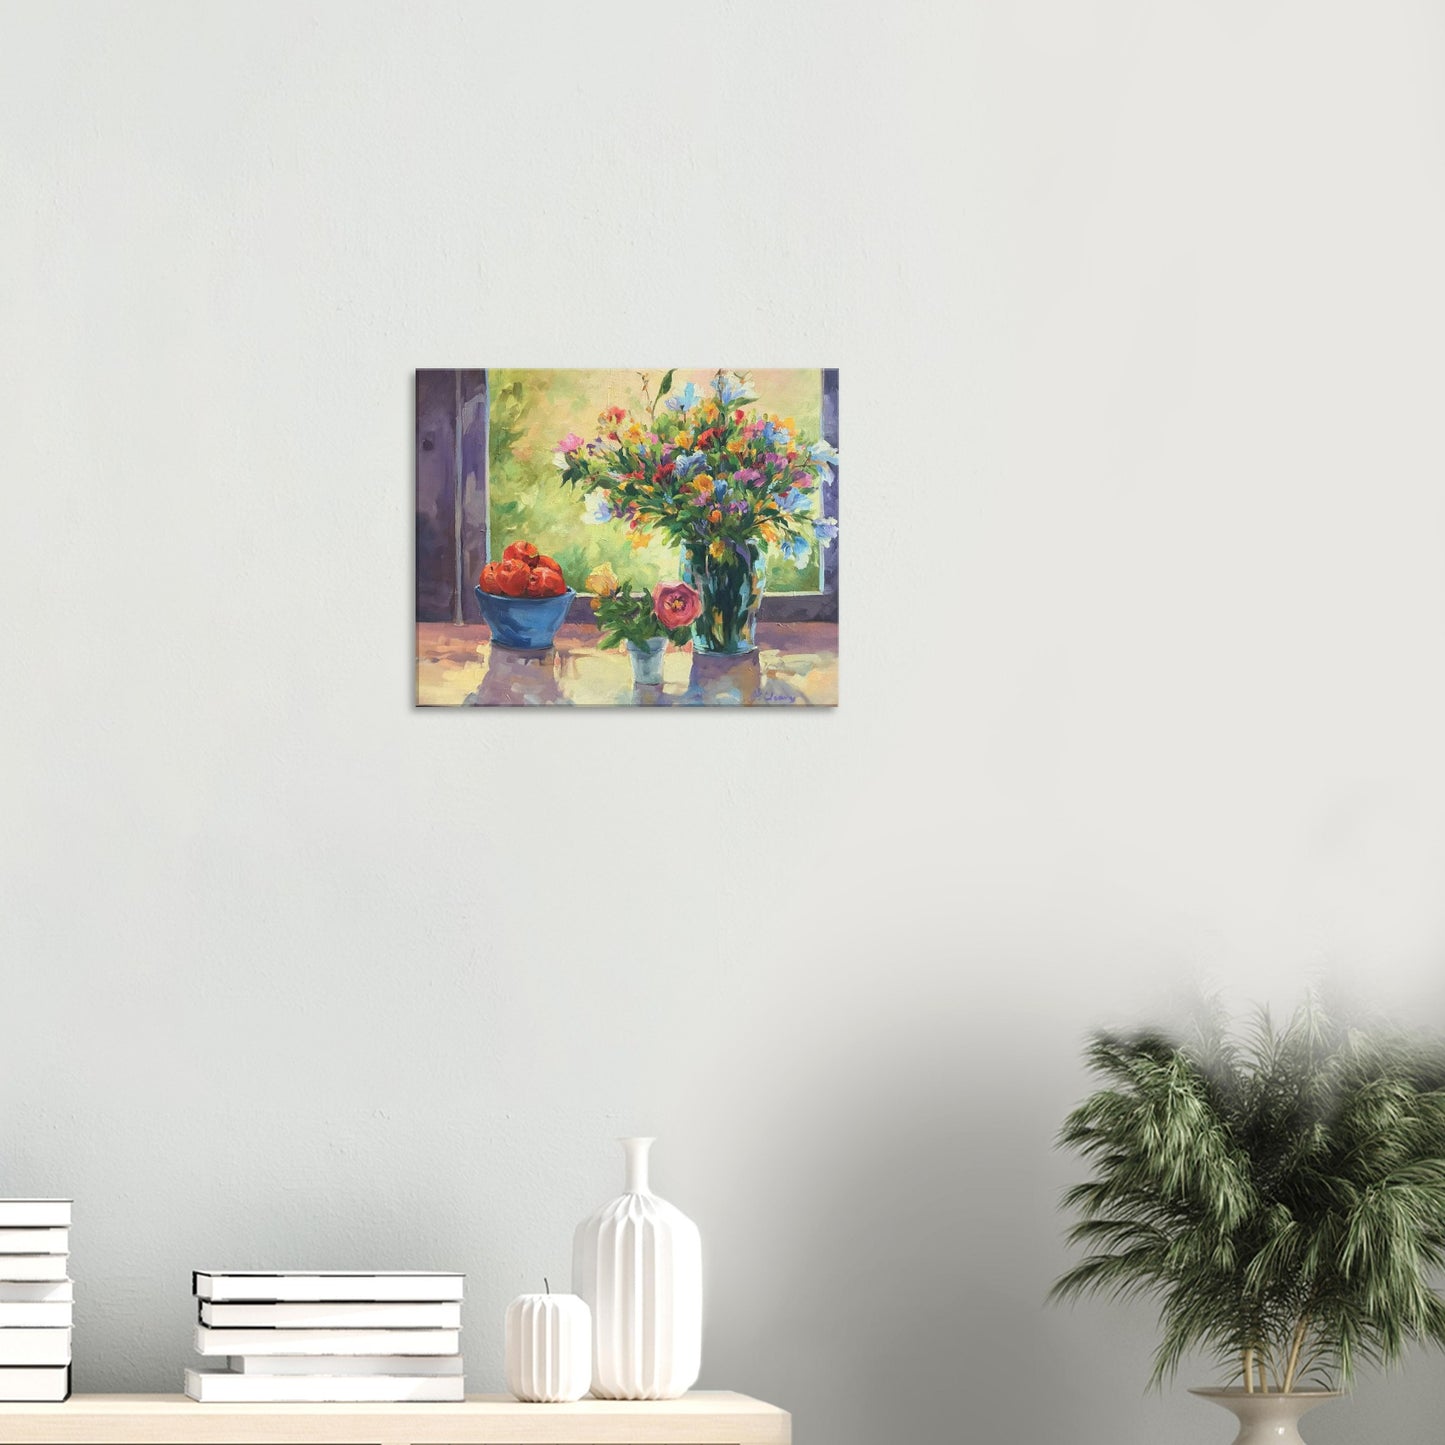 "Myrna's Apples" Floral Print 16x20 inch on Canvas Barbara Cleary Designs